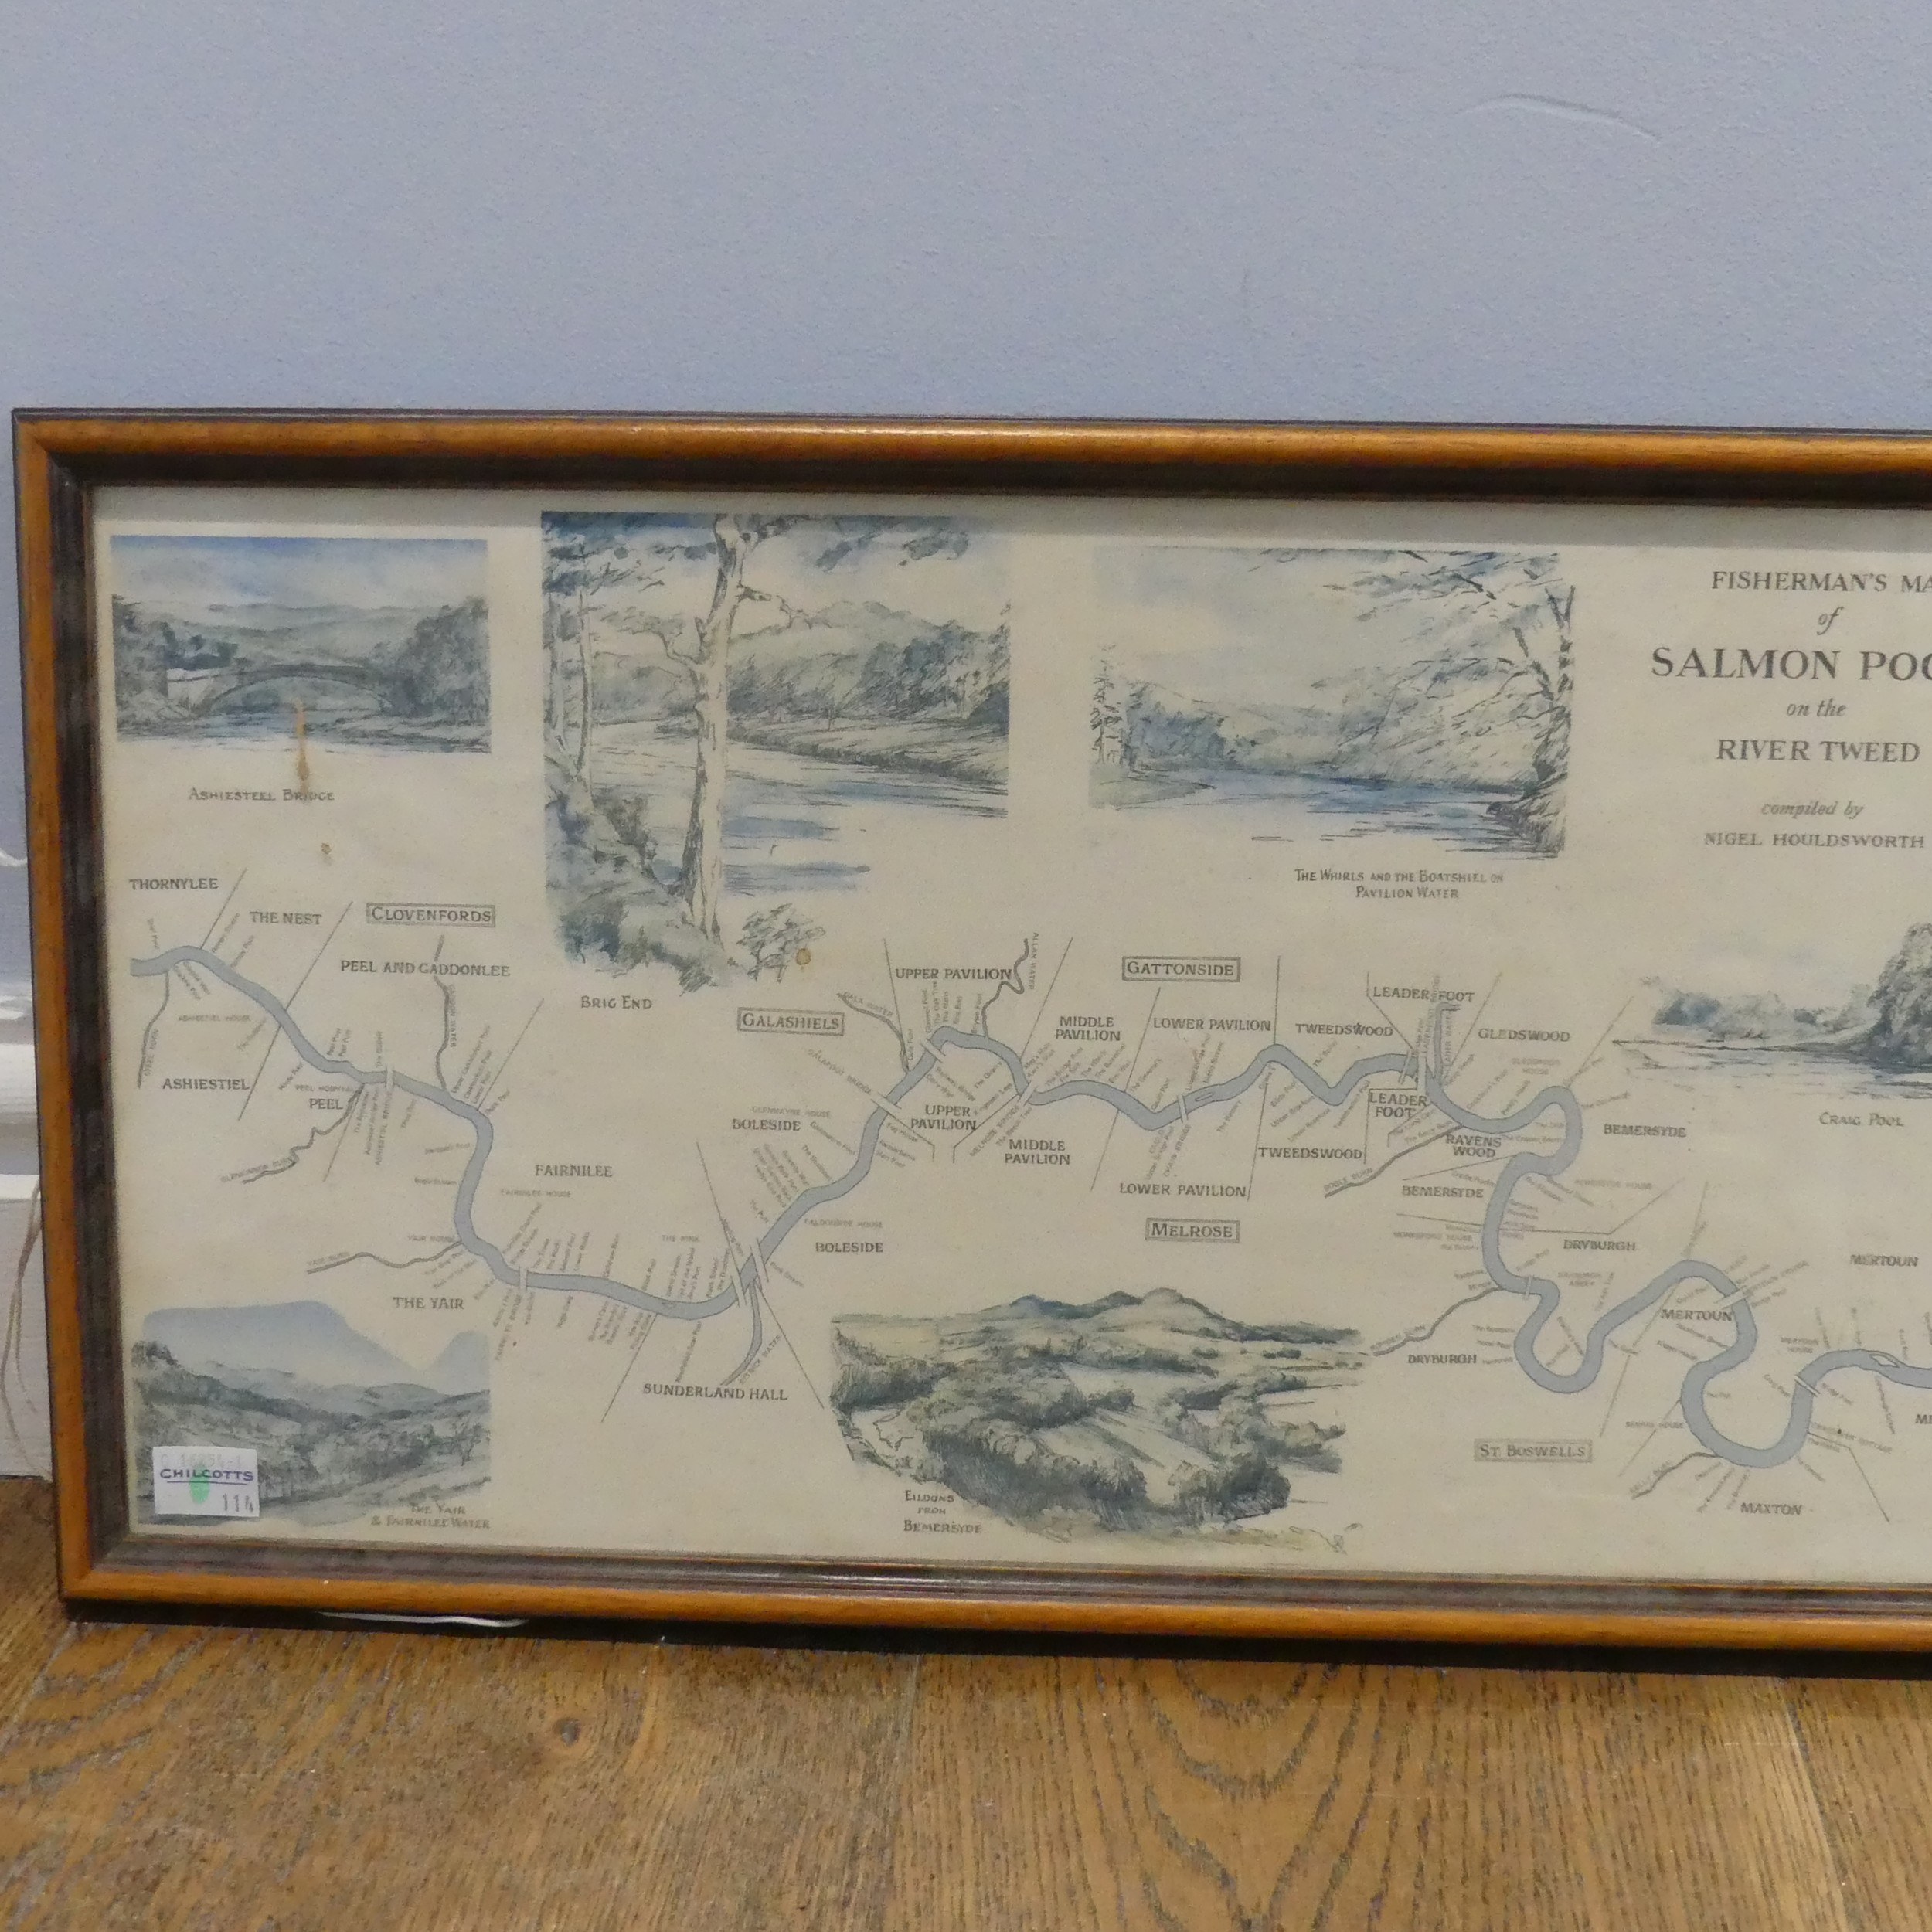 A contemporary Nigel Houldsworth "Fisherman's Map of Salmon Pools on the River Tweed'', together - Image 2 of 8